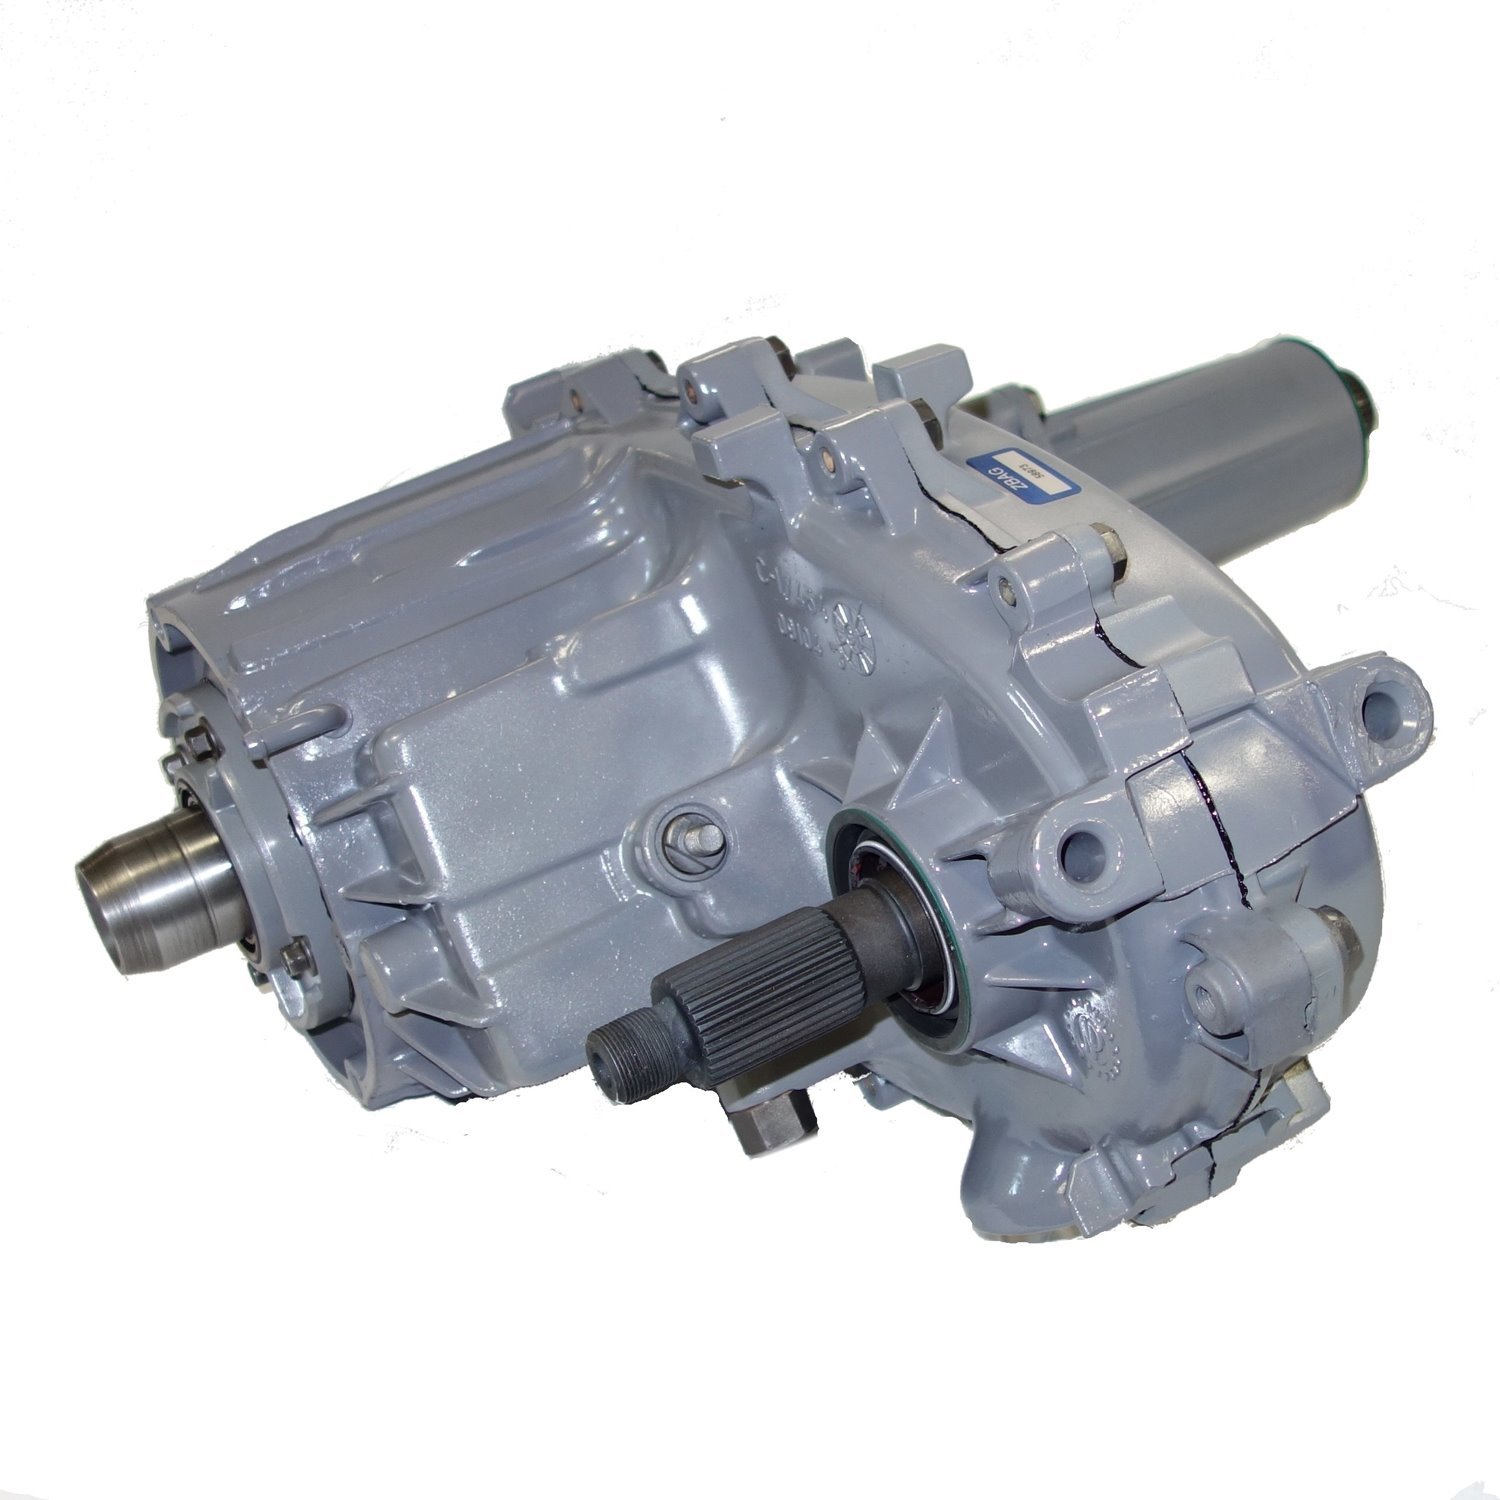 Remanufactured NP241 Transfer Case for GM 88-92 K-series